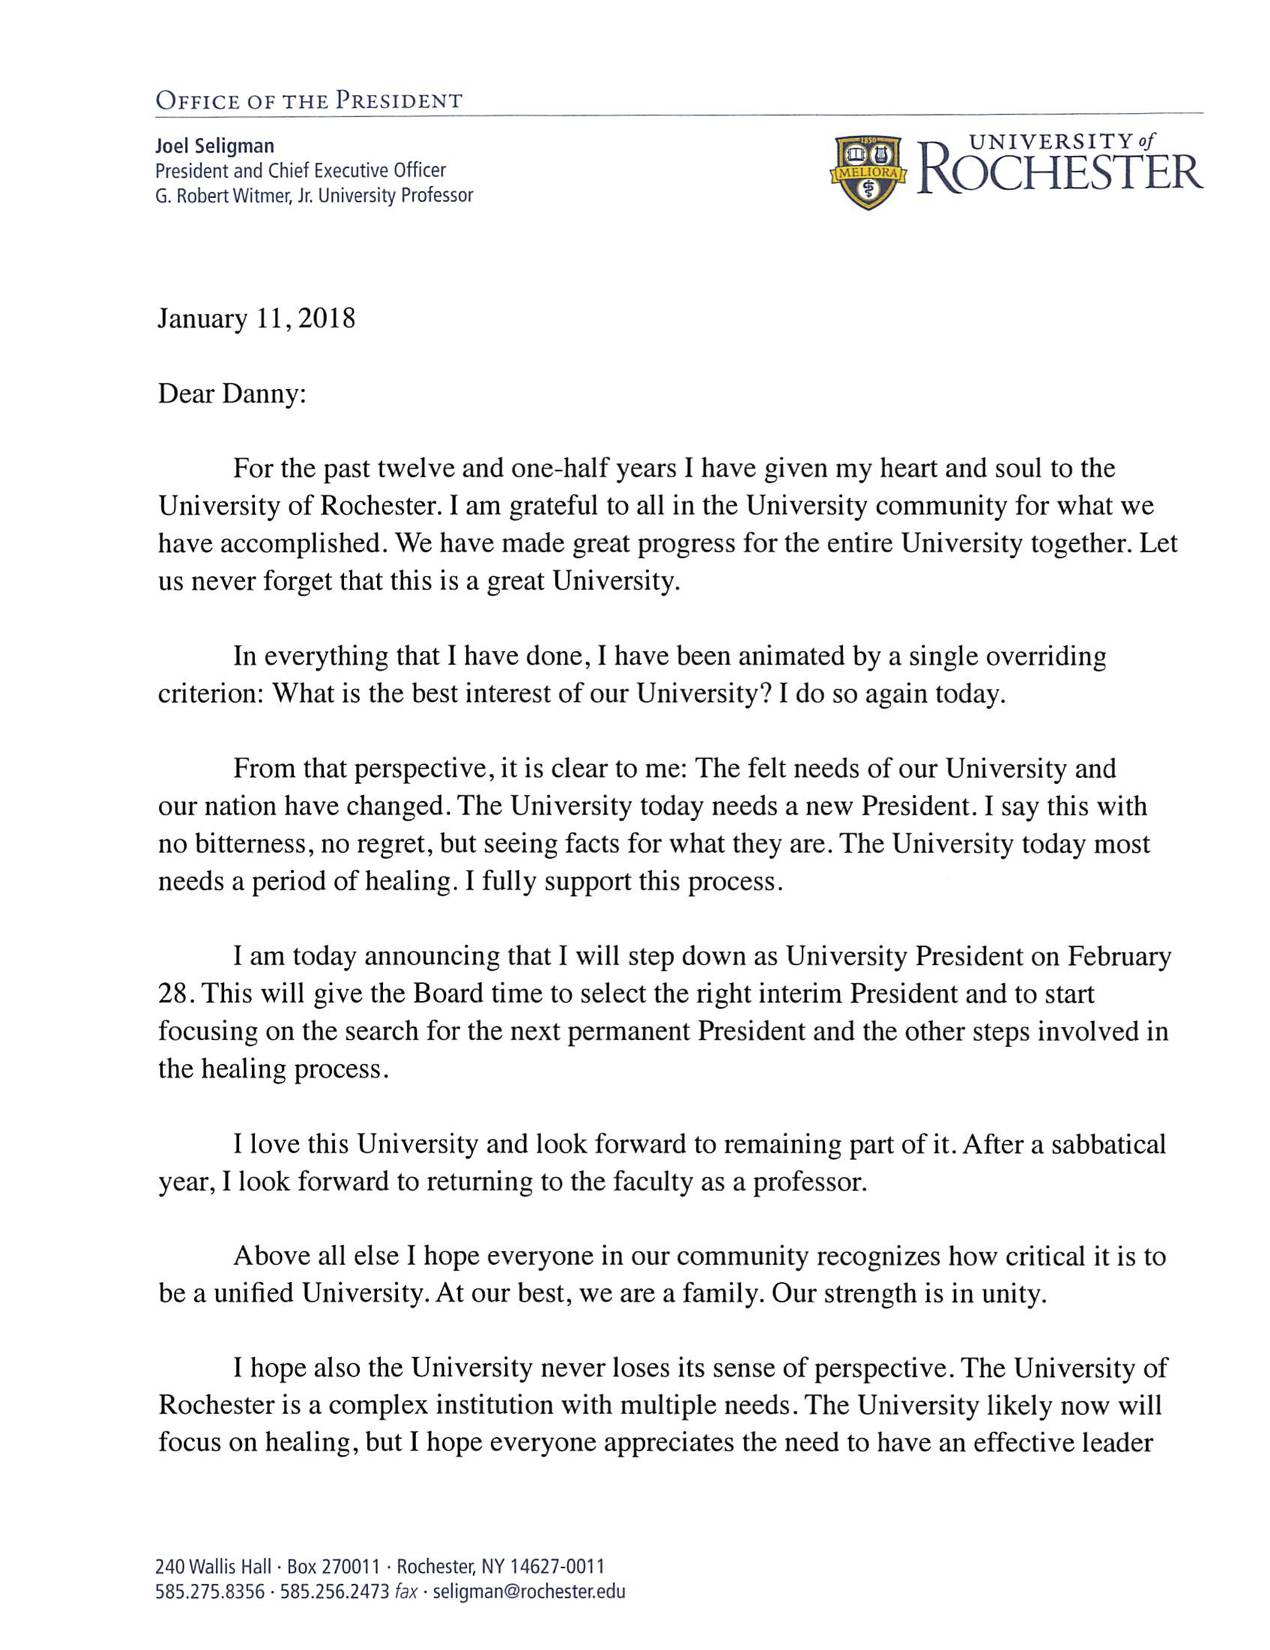 Letter from Joel Seligman, President and CEO, University of Rochester